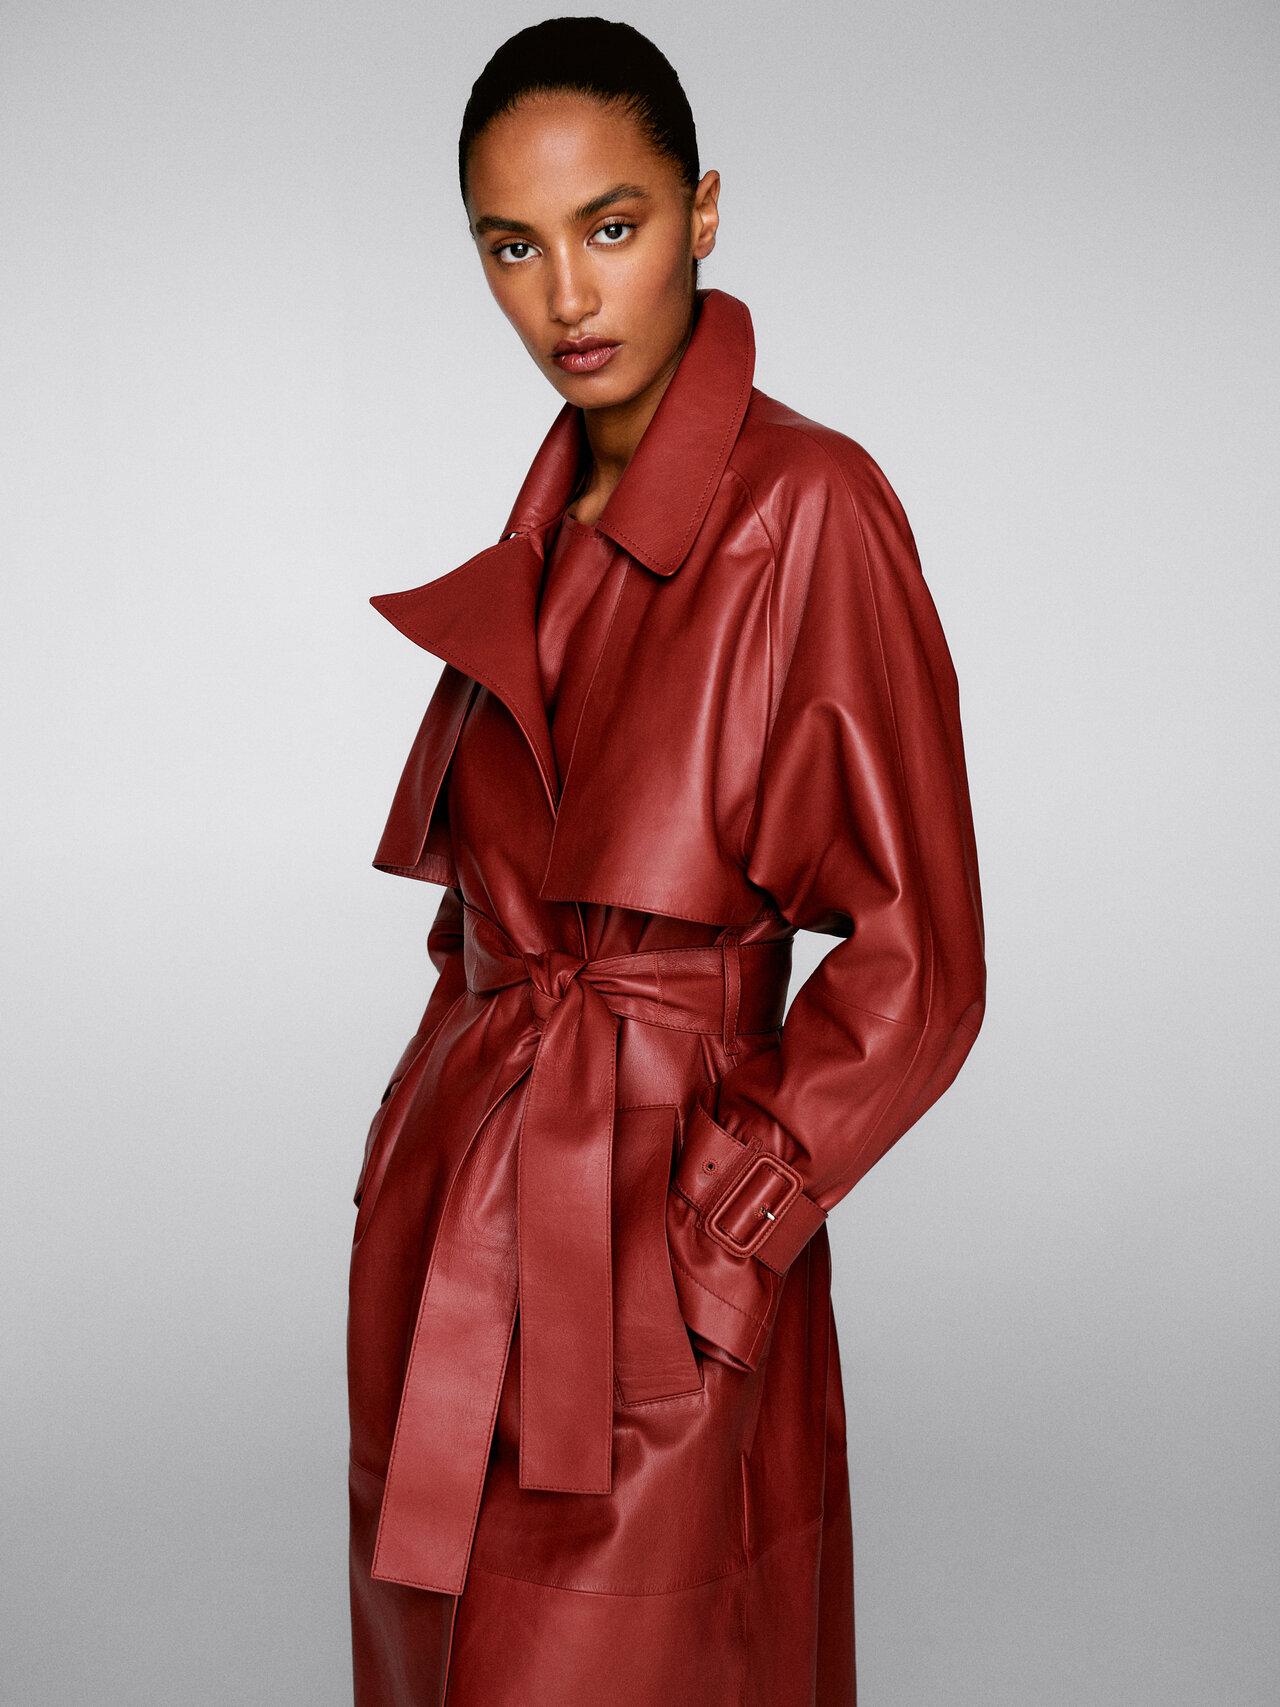 intelligens crush overvældende MASSIMO DUTTI Nappa Leather Trench Coat With Belt in Red | Lyst